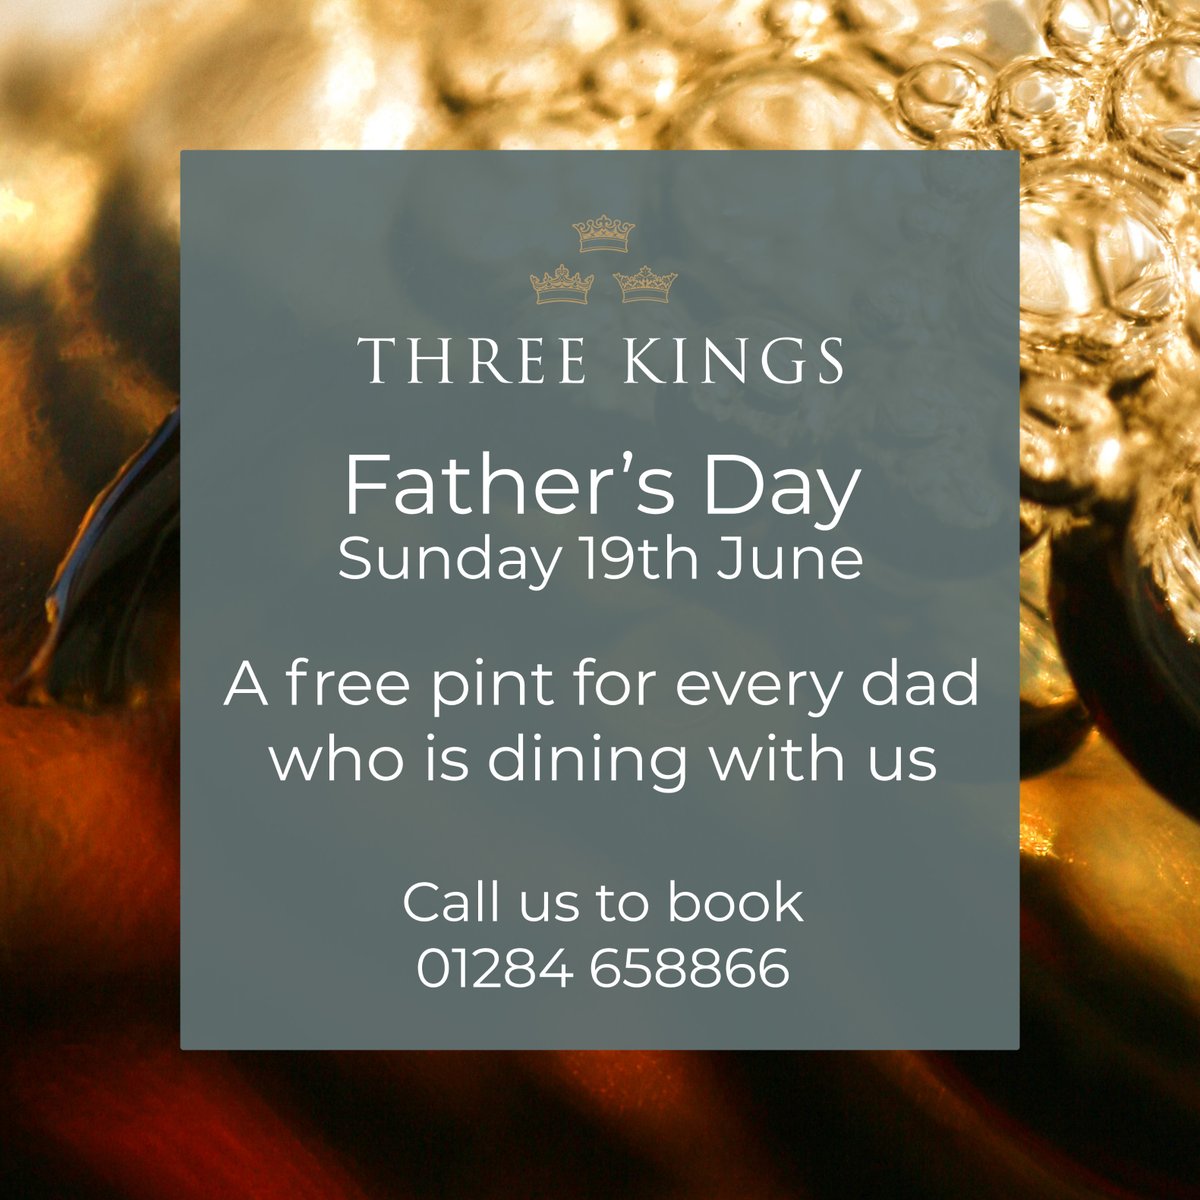 A week on Sunday is Father's Day. Any Dad who's dining with us on that day gets a free pint. #freebeer #cheers #fathersday #burystedmunds #fornhamallsaints 🍻